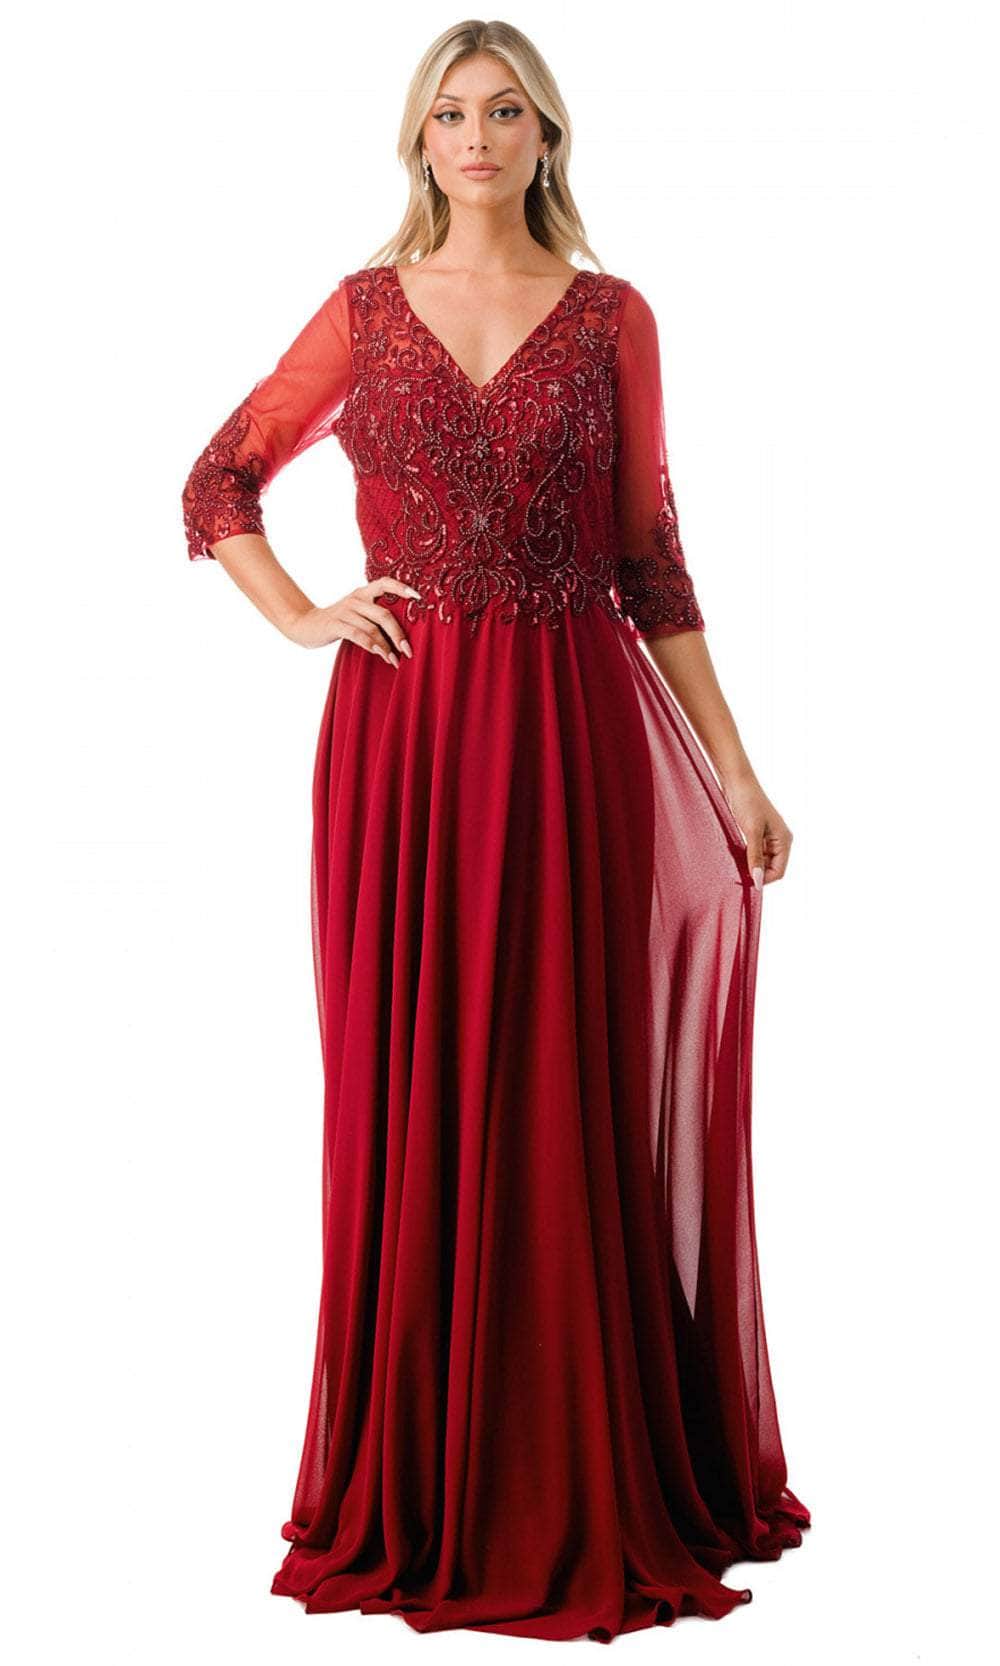 Aspeed Design M2722 - Illusion Sleeve A-Line Evening Gown
